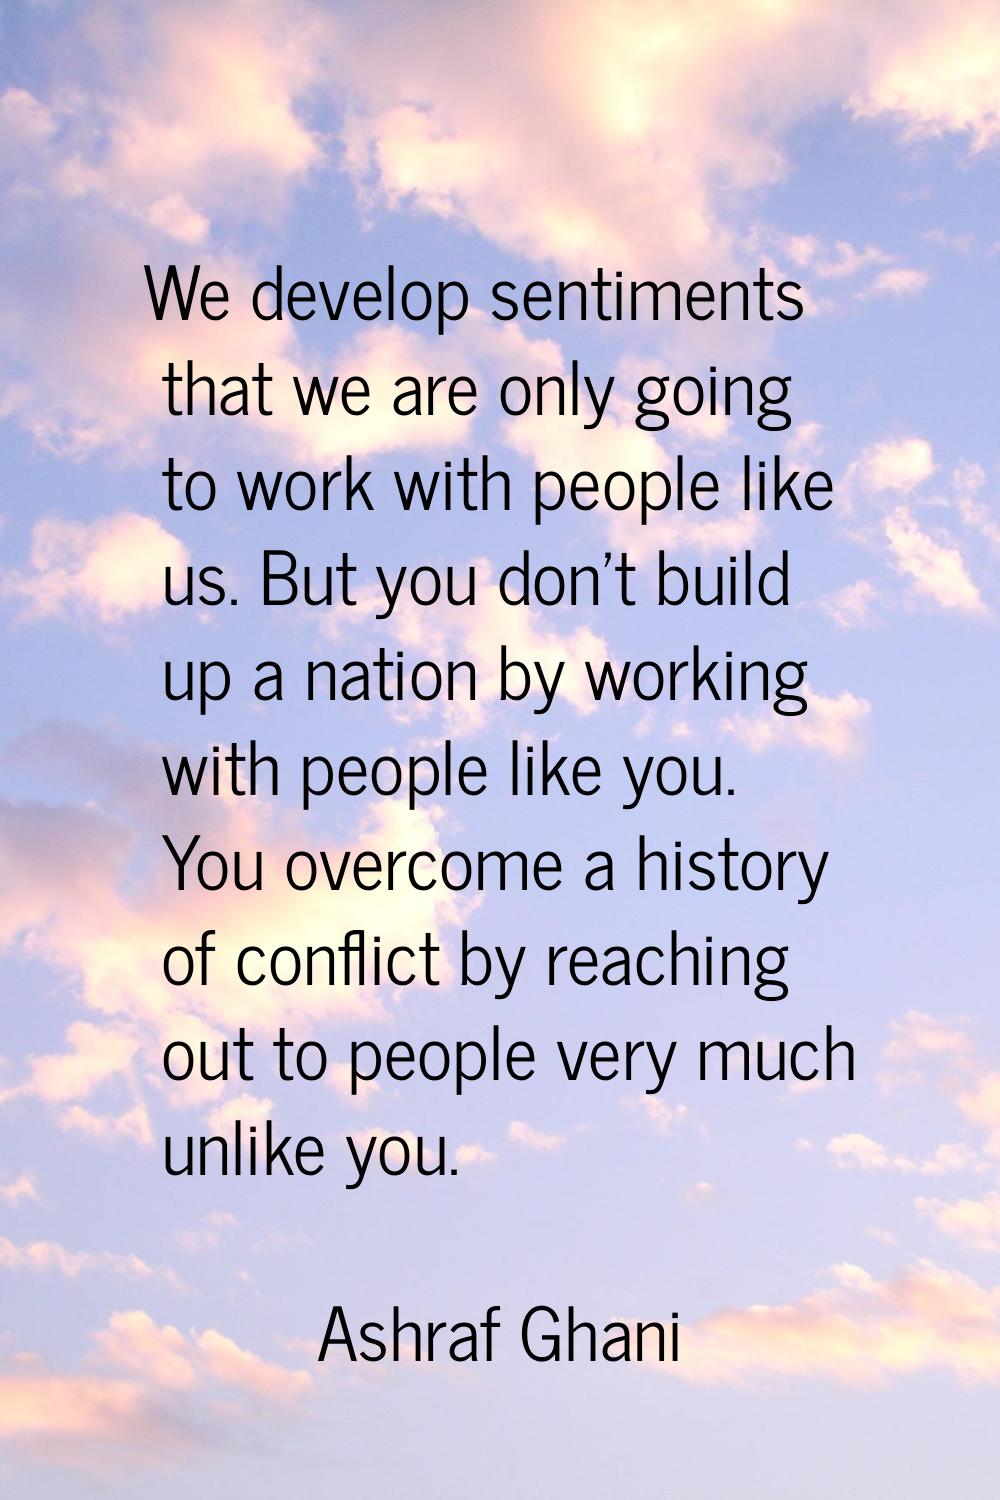 We develop sentiments that we are only going to work with people like us. But you don't build up a 